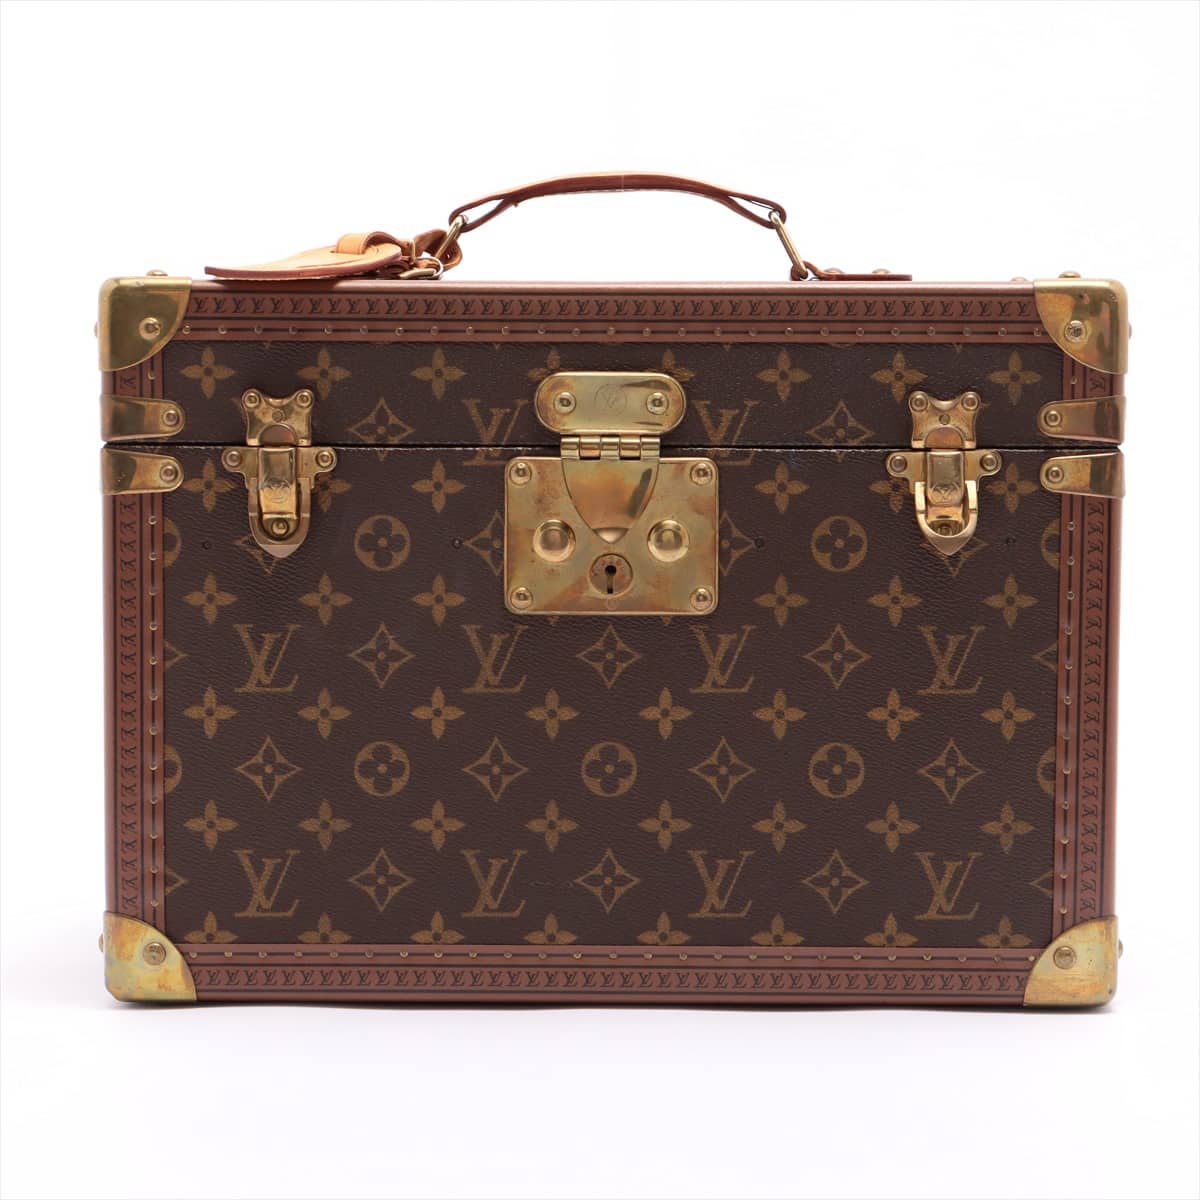 Louis Vuitton Monogram Boite Pharmacie M21826 Comes with 1 key, name tag, and makeup case